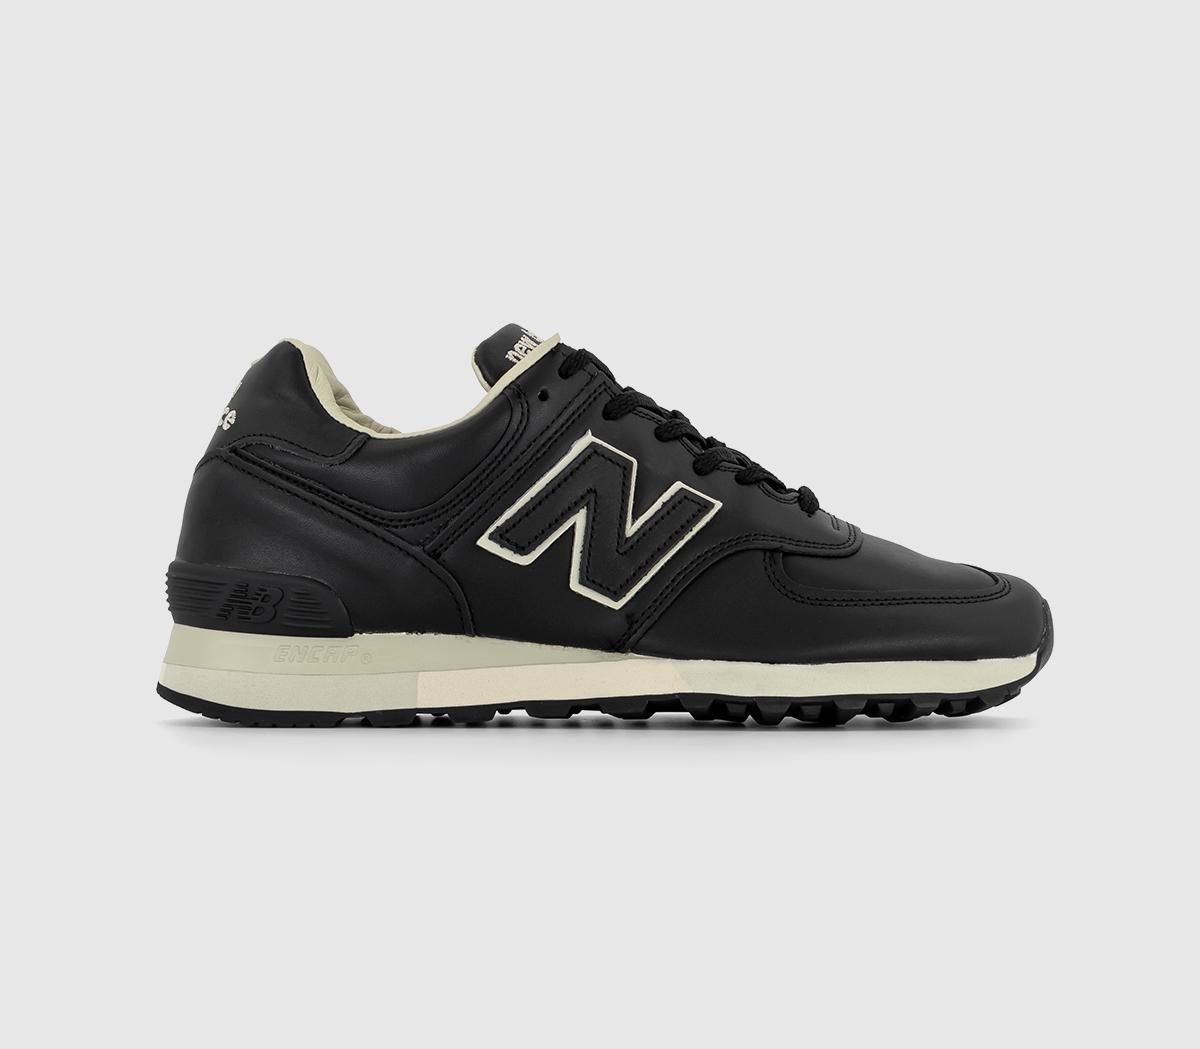 New Balance Mens 576 Trainers Black Off White, 9